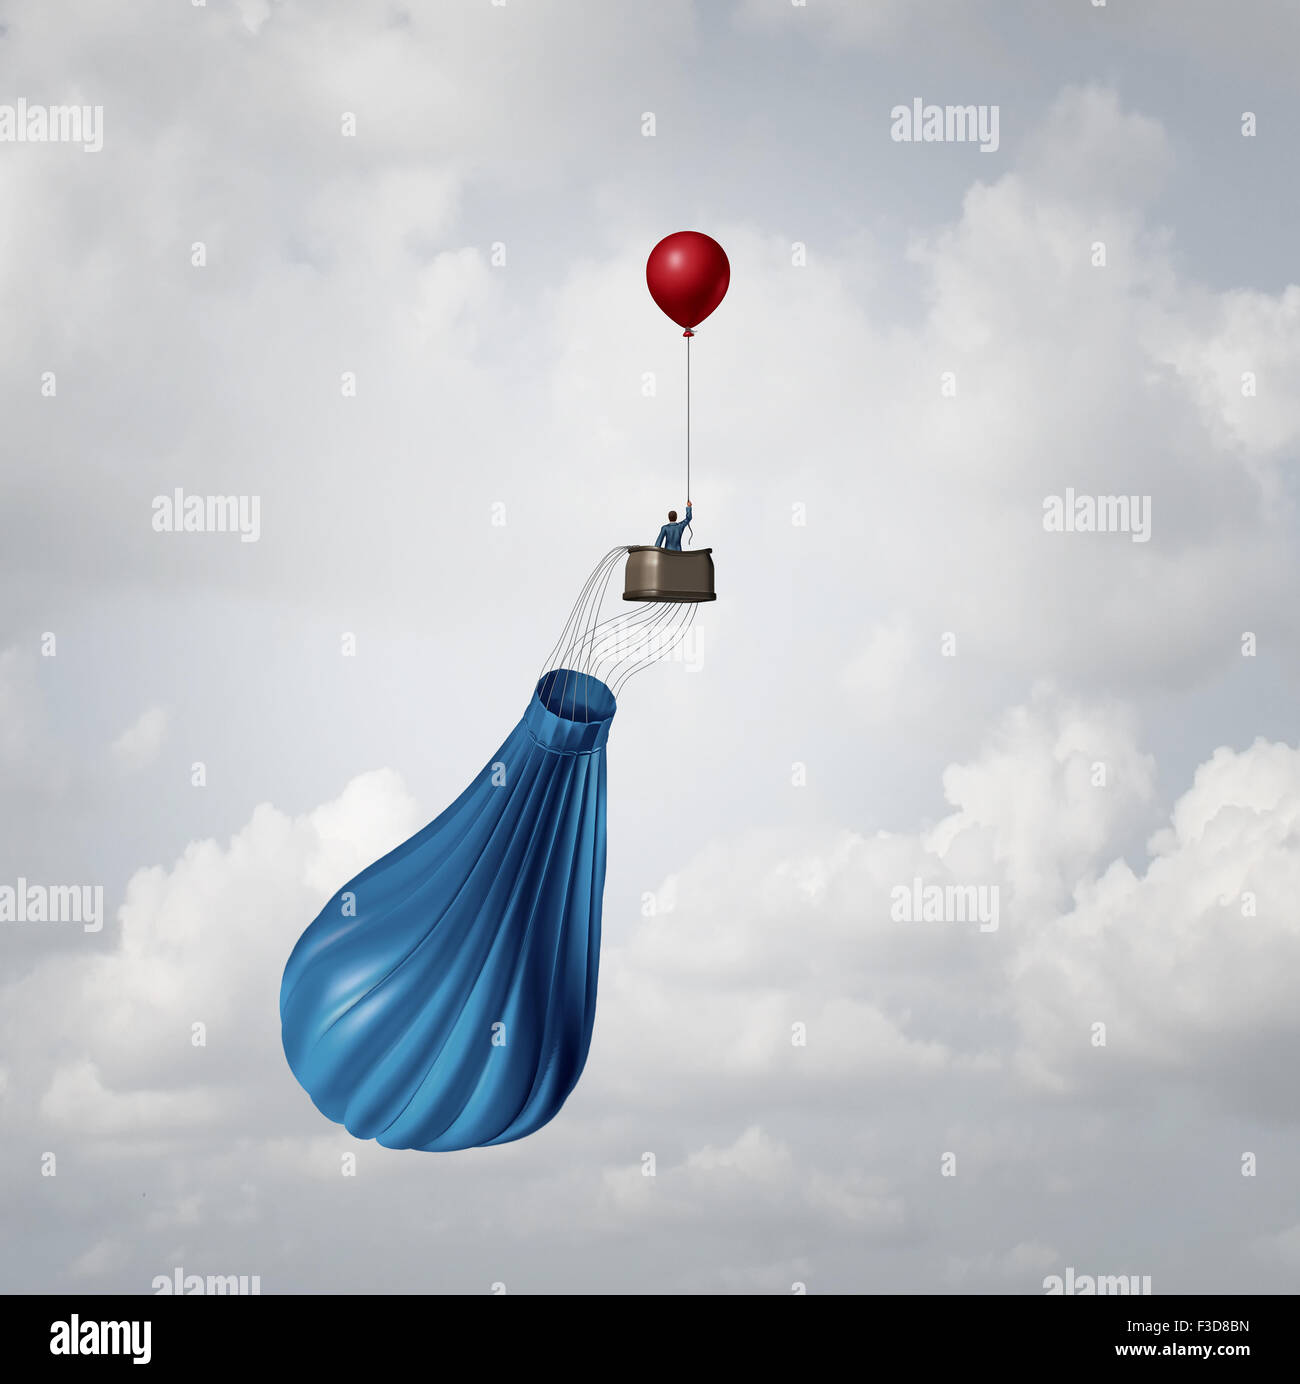 Emergency business plan and crisis management strategy metaphor as a businessman in a broken deflated hot air balloon being saved by a single small red party balloon as an innovative response solution idea. Stock Photo